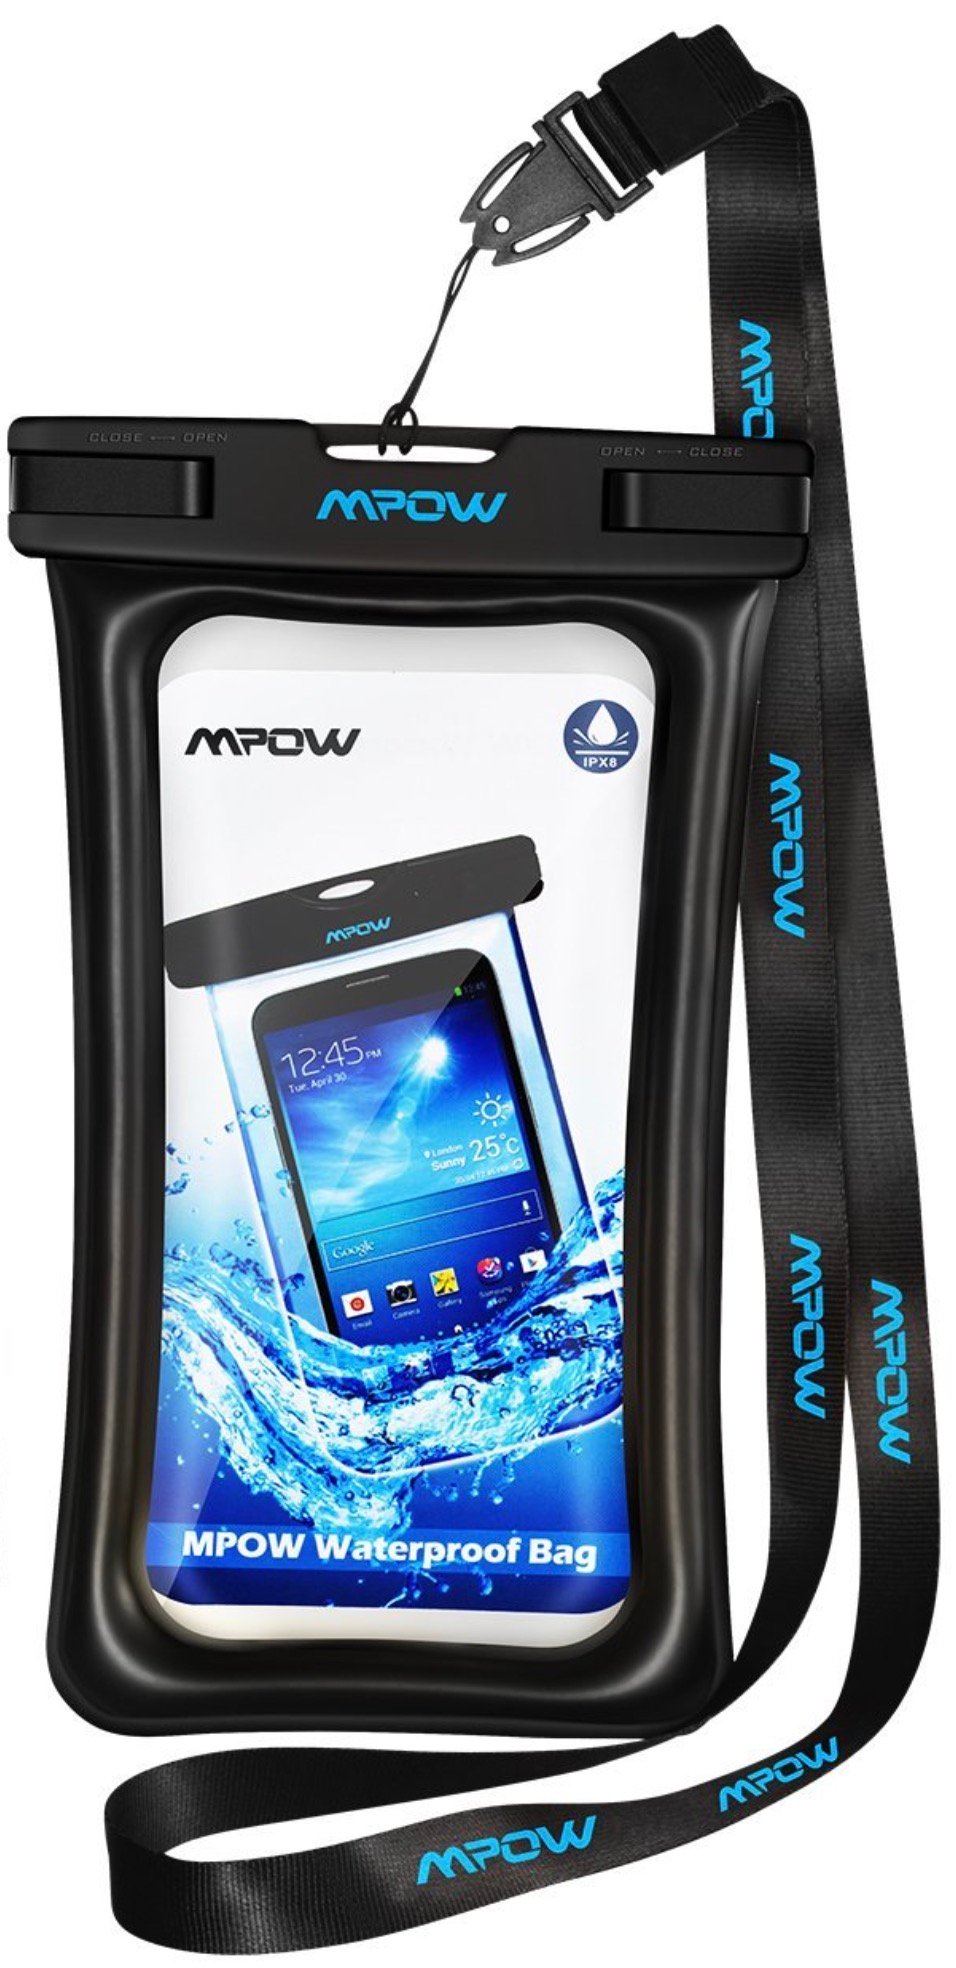 Mpow Waterproof Case PVC Phone Pouch Dry Bag for Outdoor Activities ...